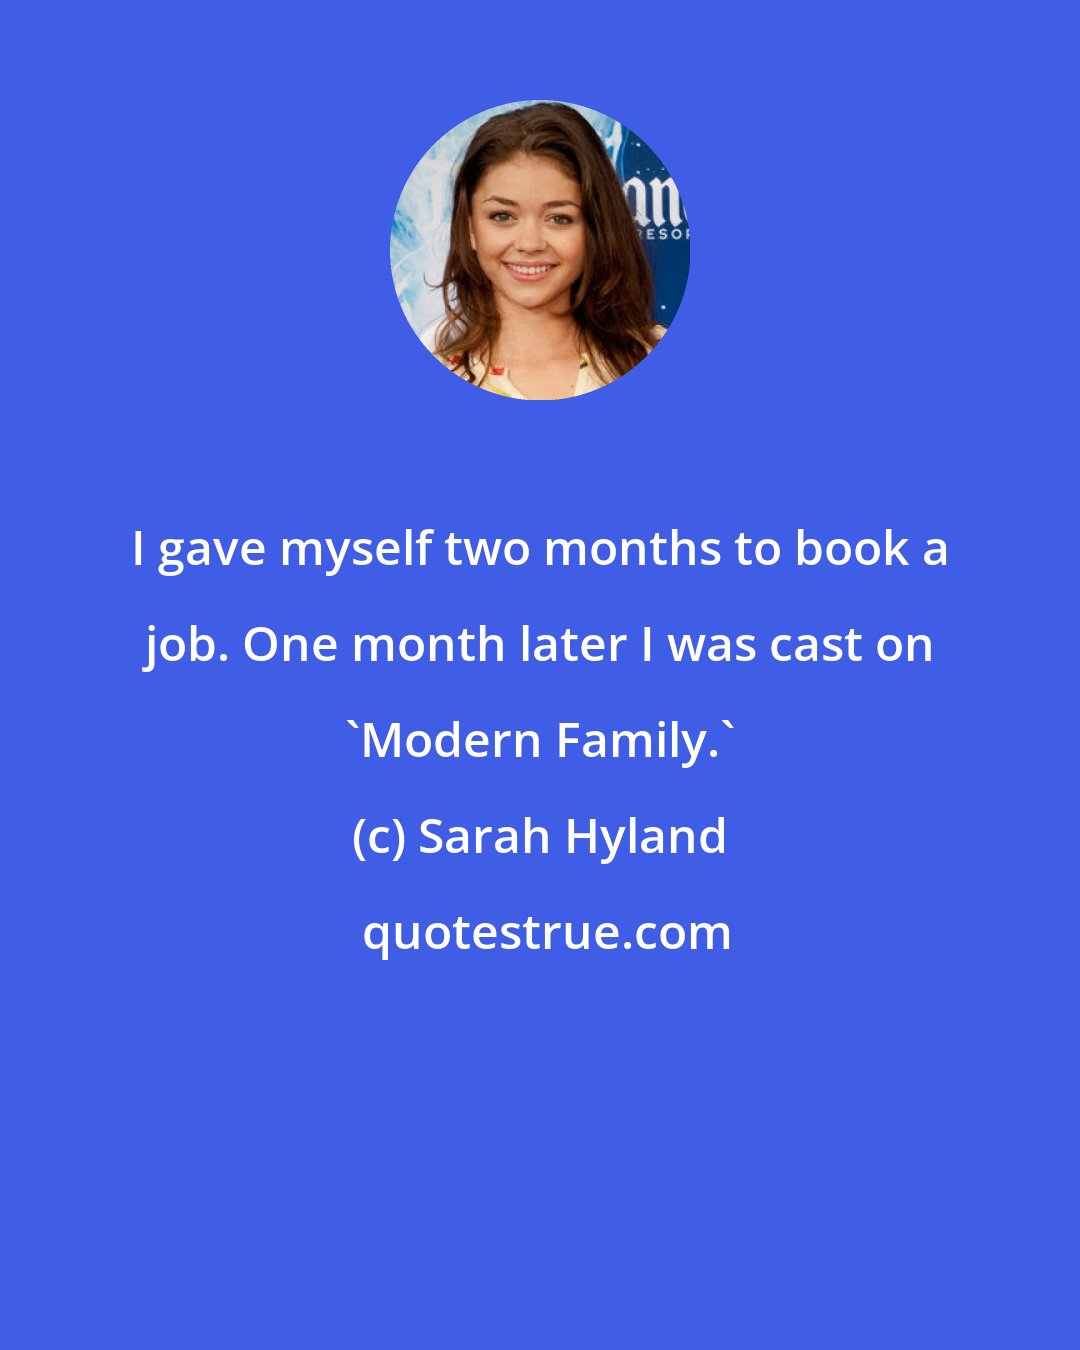 Sarah Hyland: I gave myself two months to book a job. One month later I was cast on 'Modern Family.'